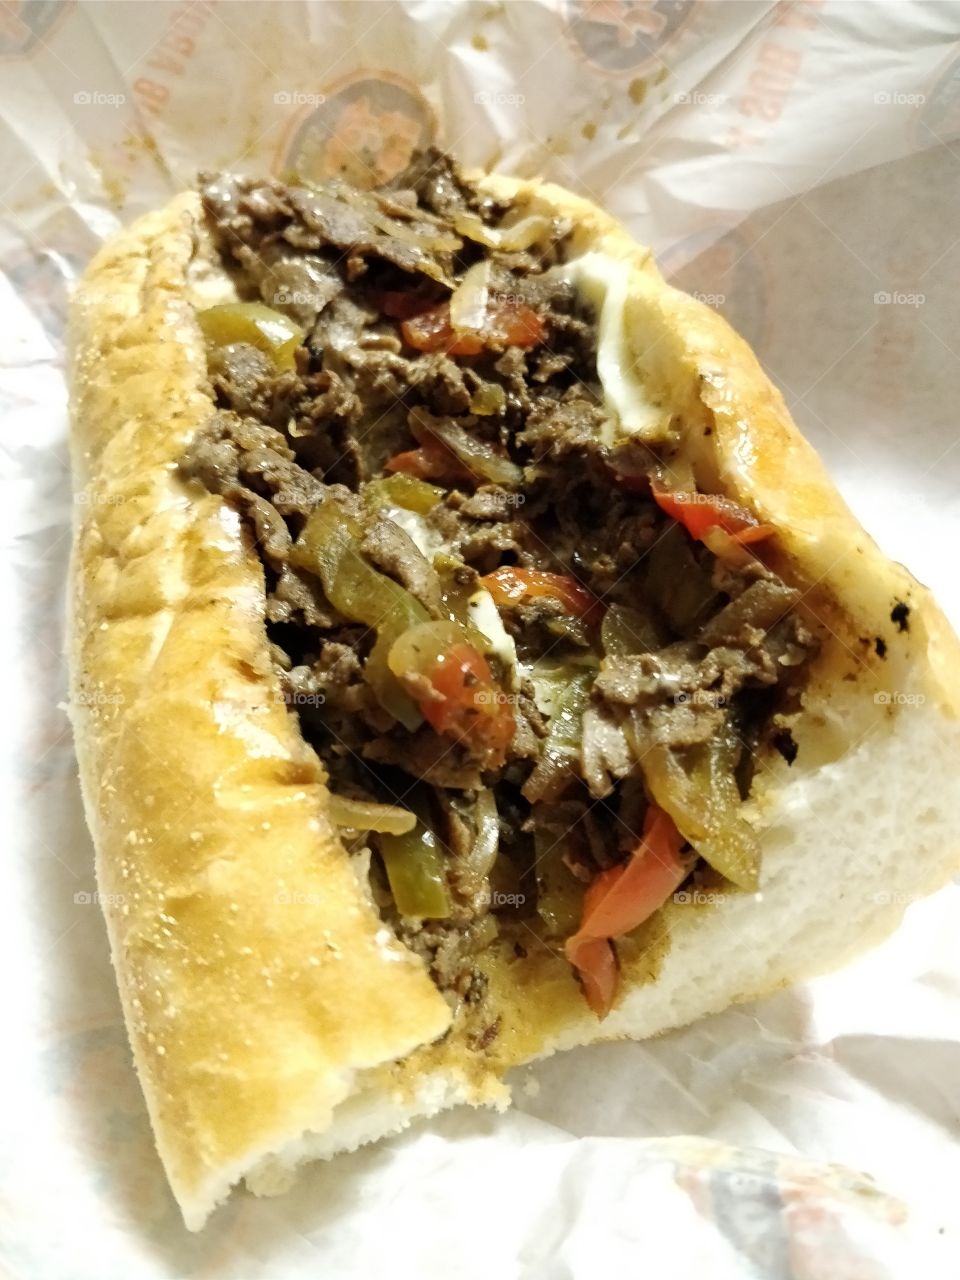 Jersey Mike's Chipotle Cheese steak